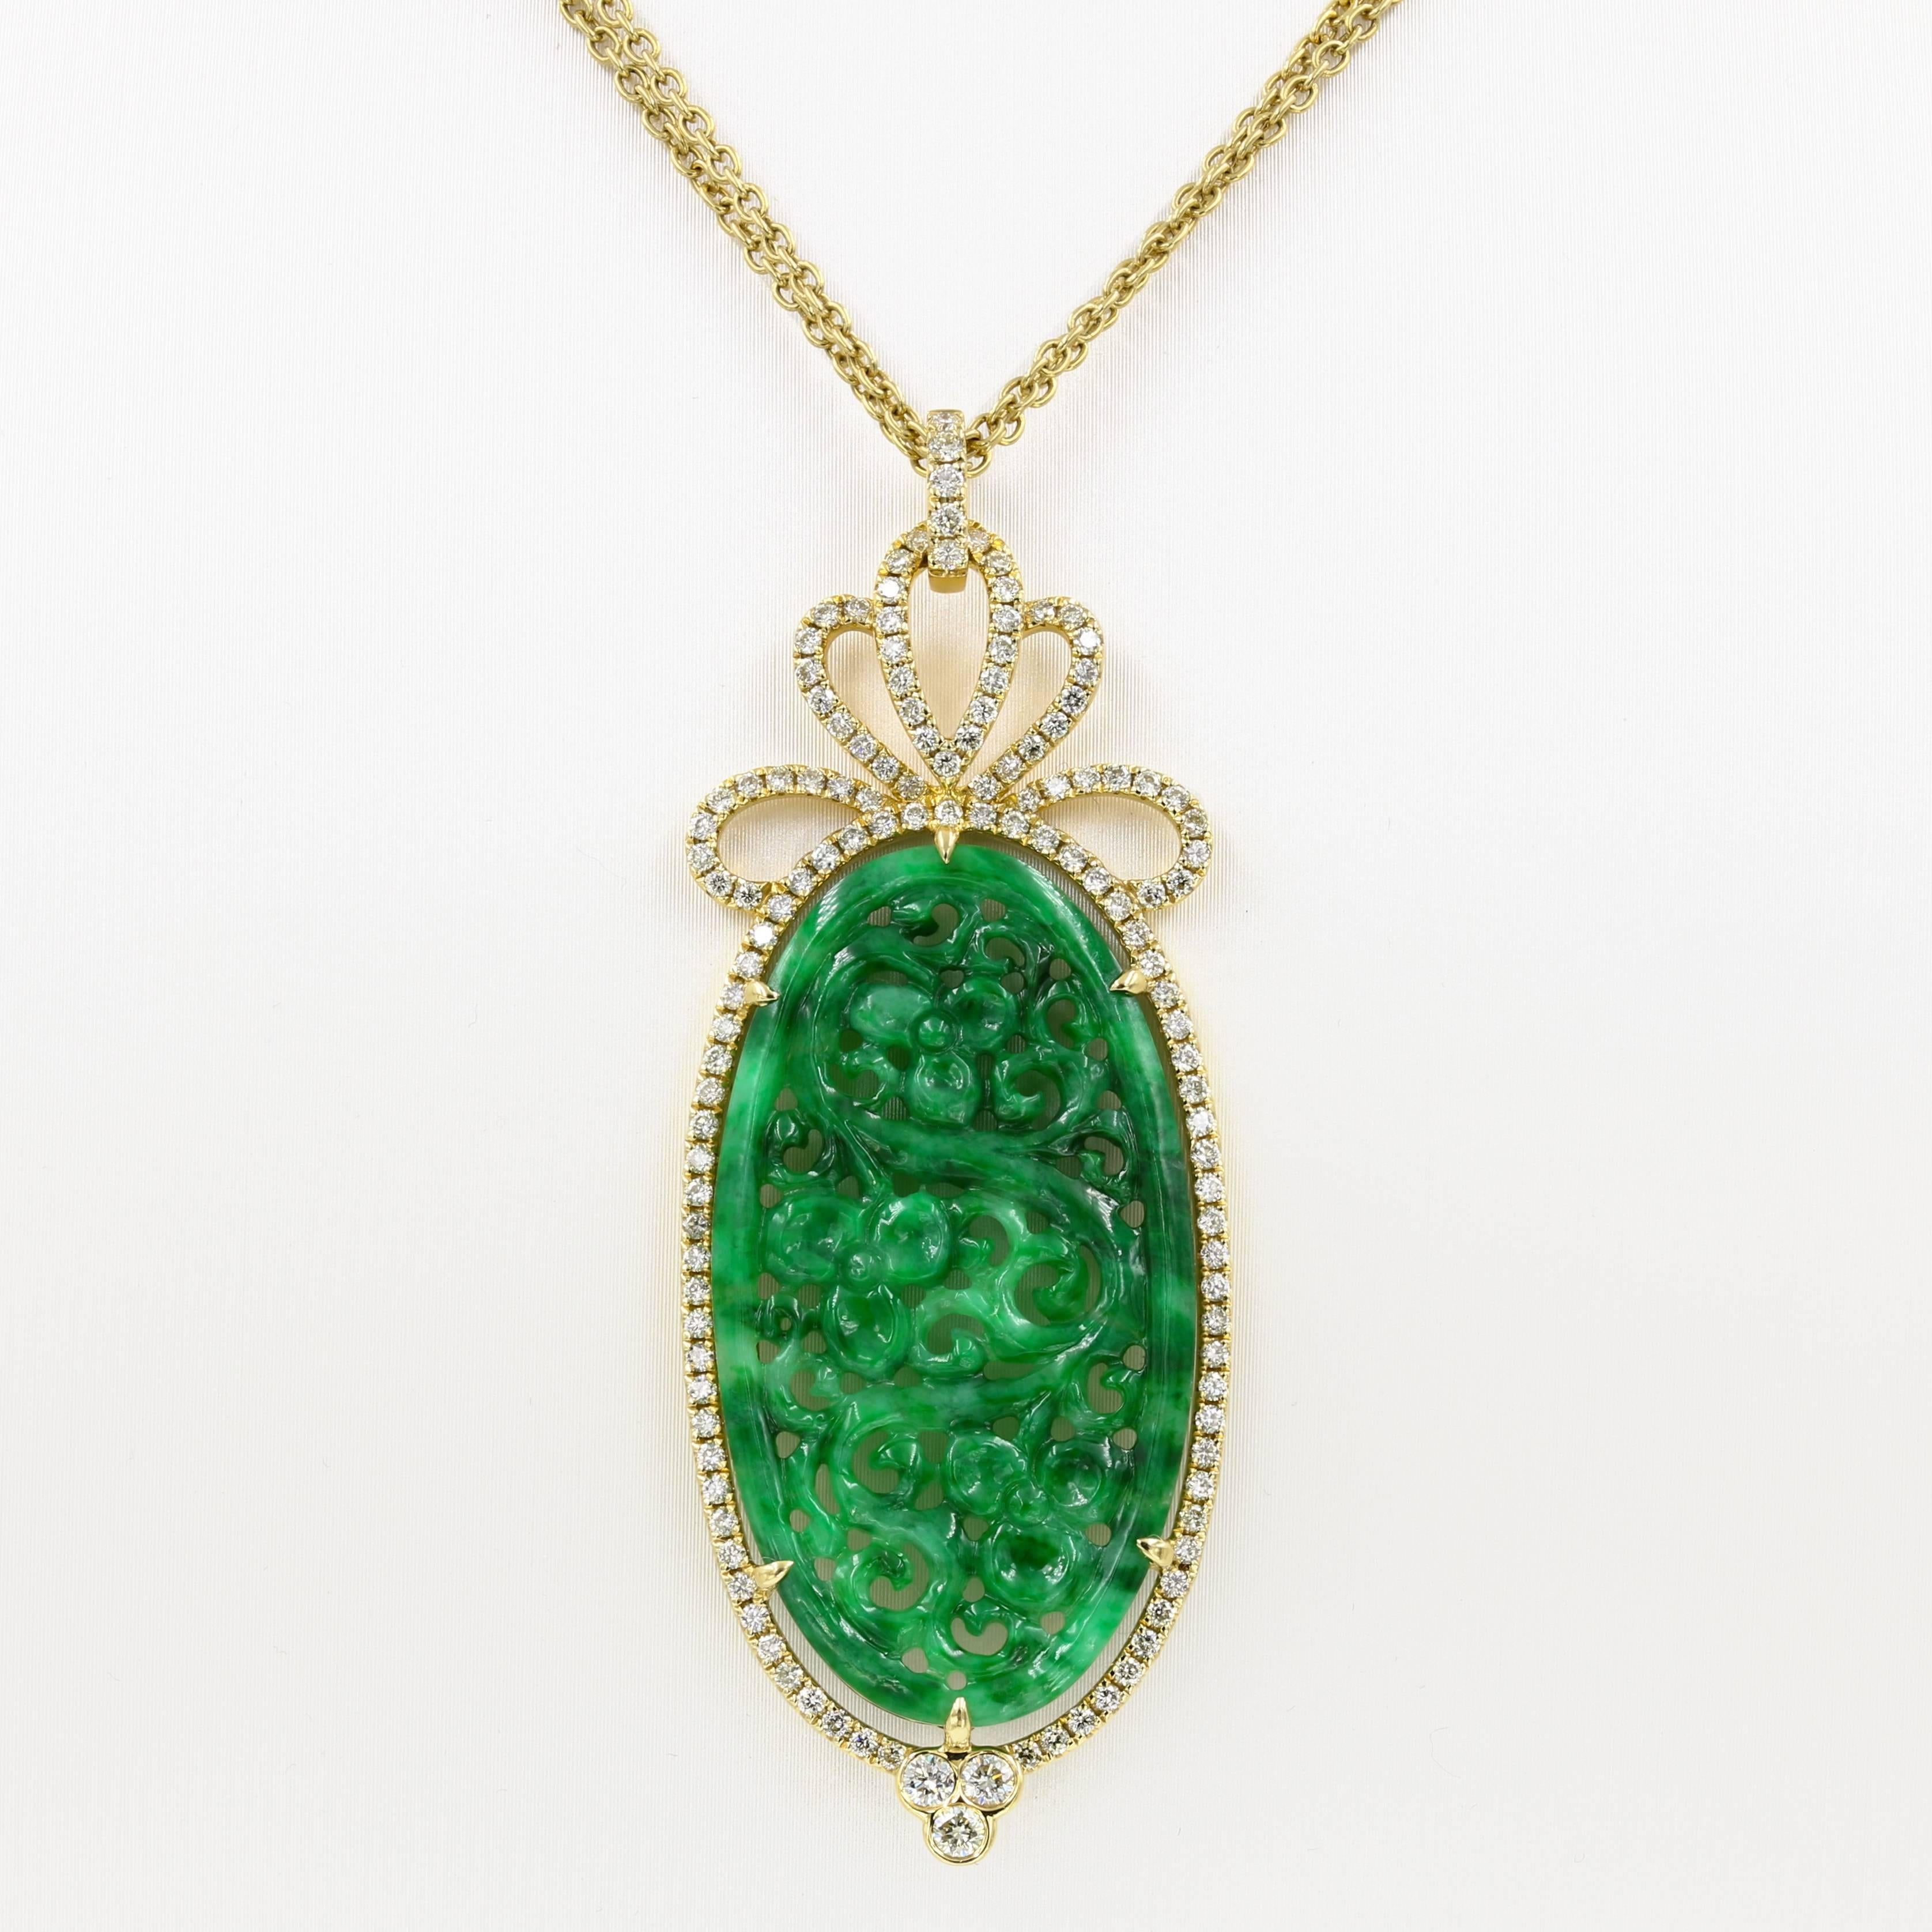 This elegant necklace in 18kt. yellow gold contains a carved oval green jade (approx. 21x40mm) surrounded by 131 round diamonds= 1.26cts. t.w. The necklace is 20